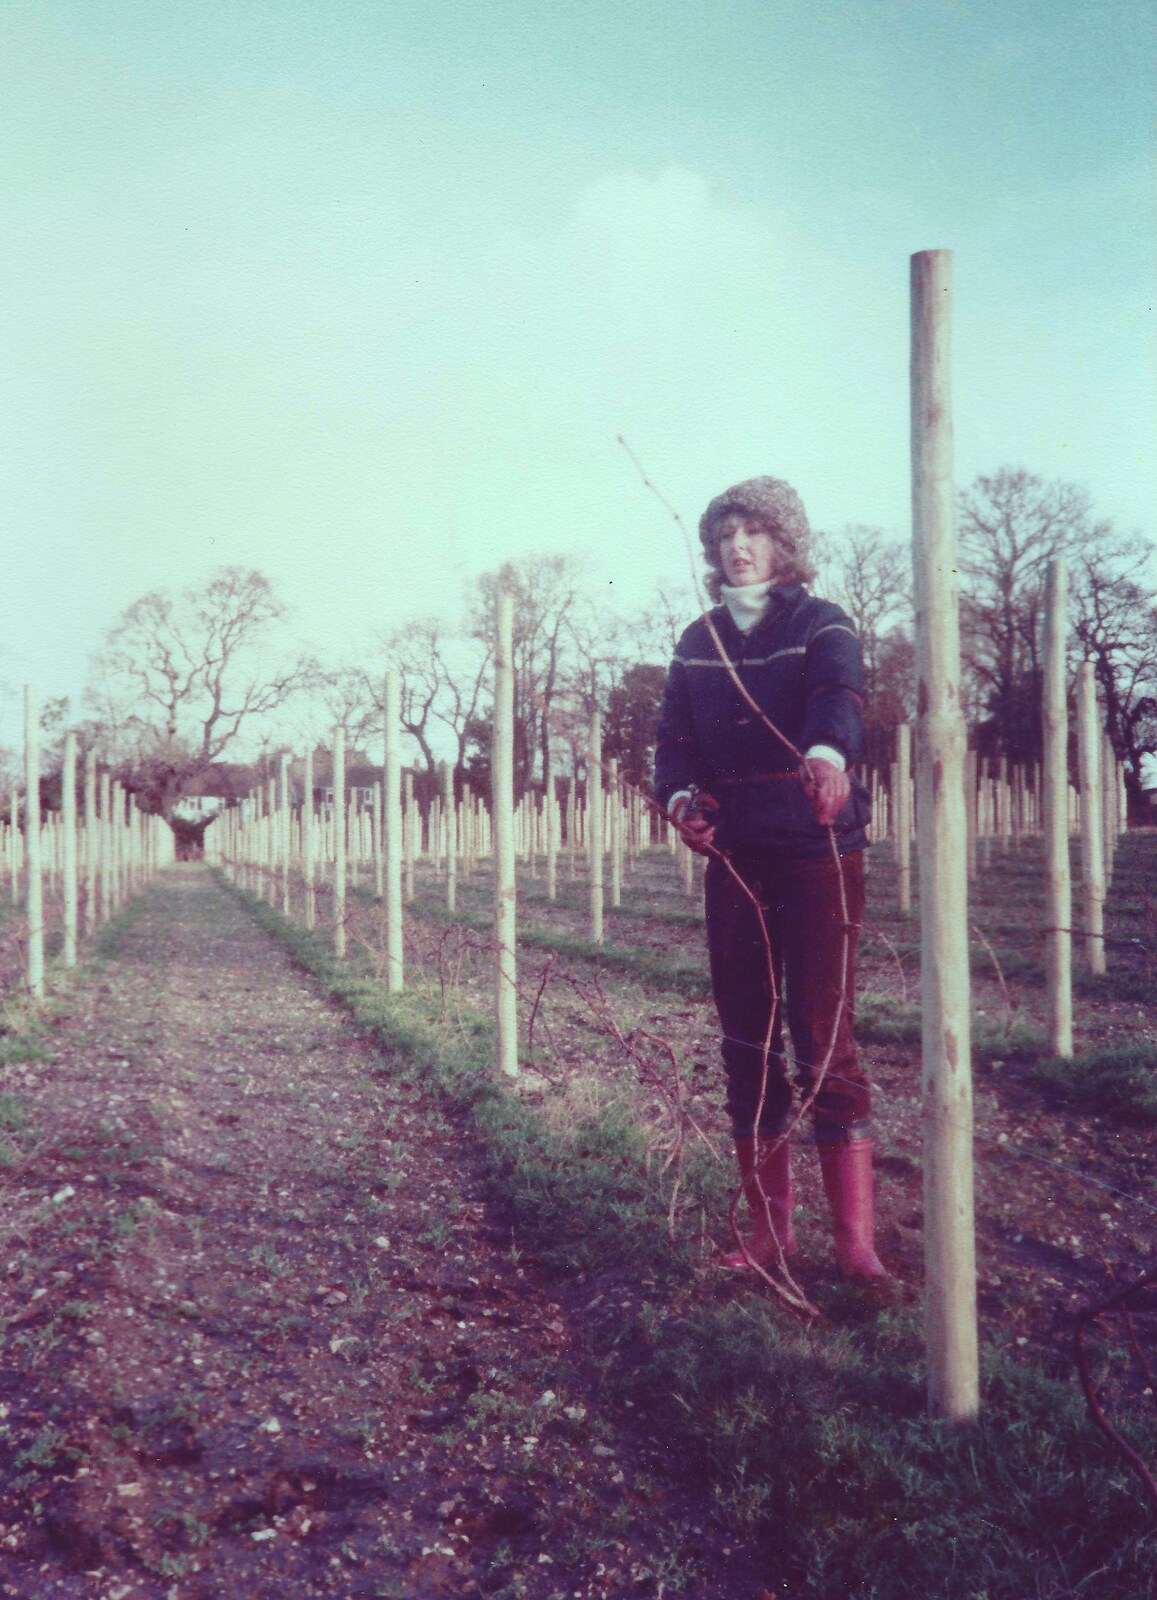 Bare vines are trained from Constructing a Vineyard, Harrow Road, Bransgore, Dorset - 1st September 1981